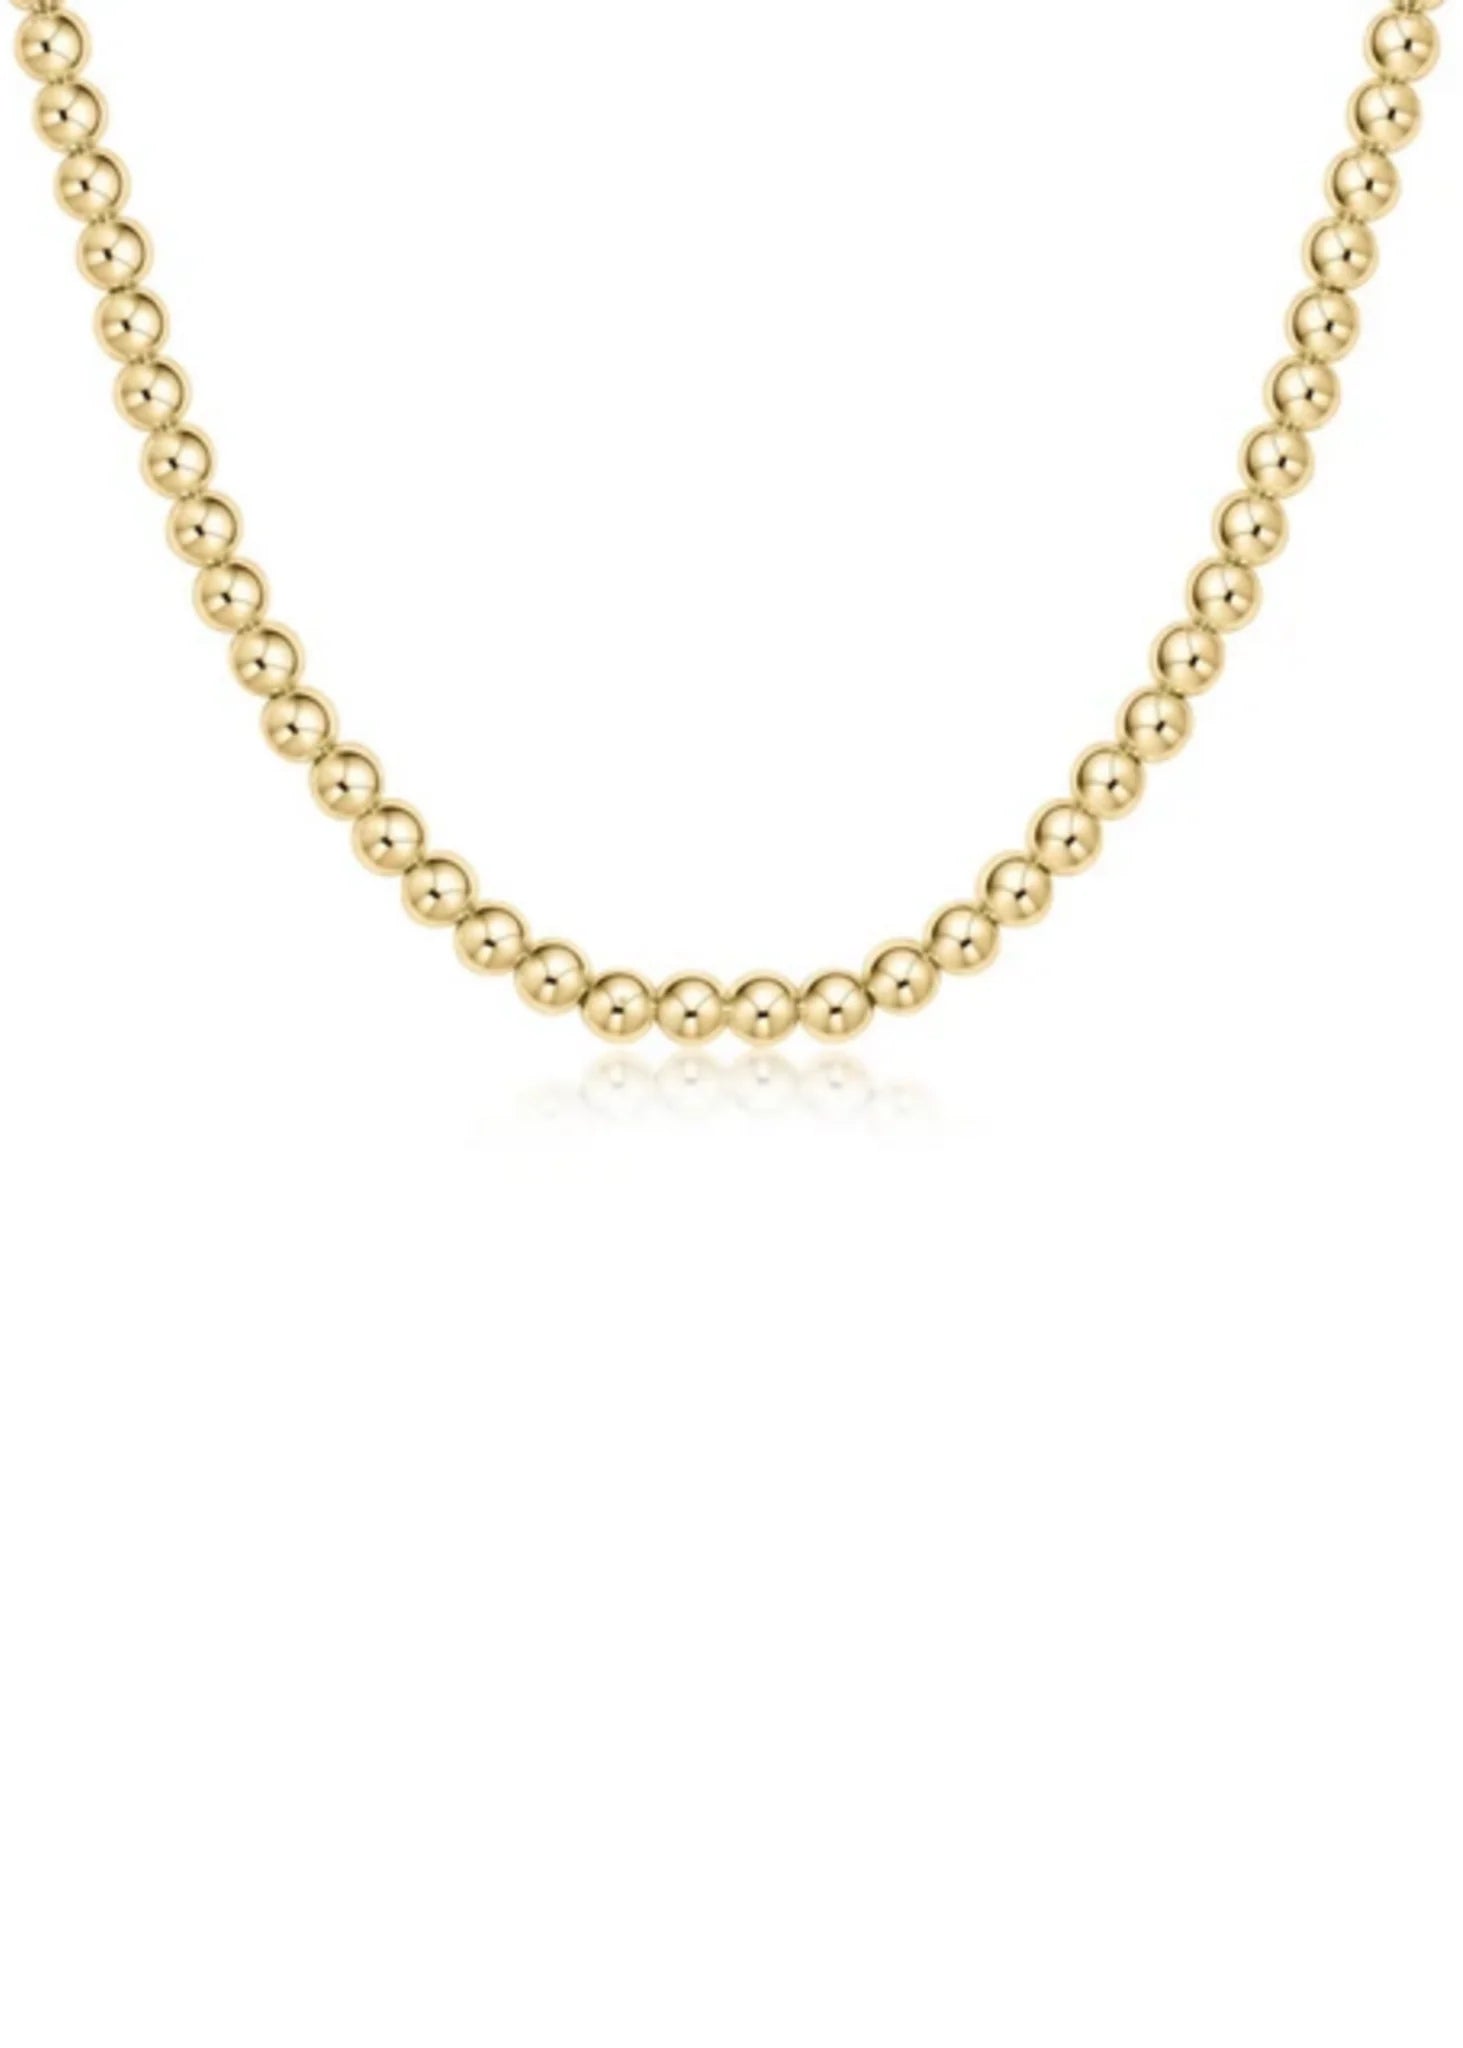 15" Choker Classic Gold 5mm Bead Necklace